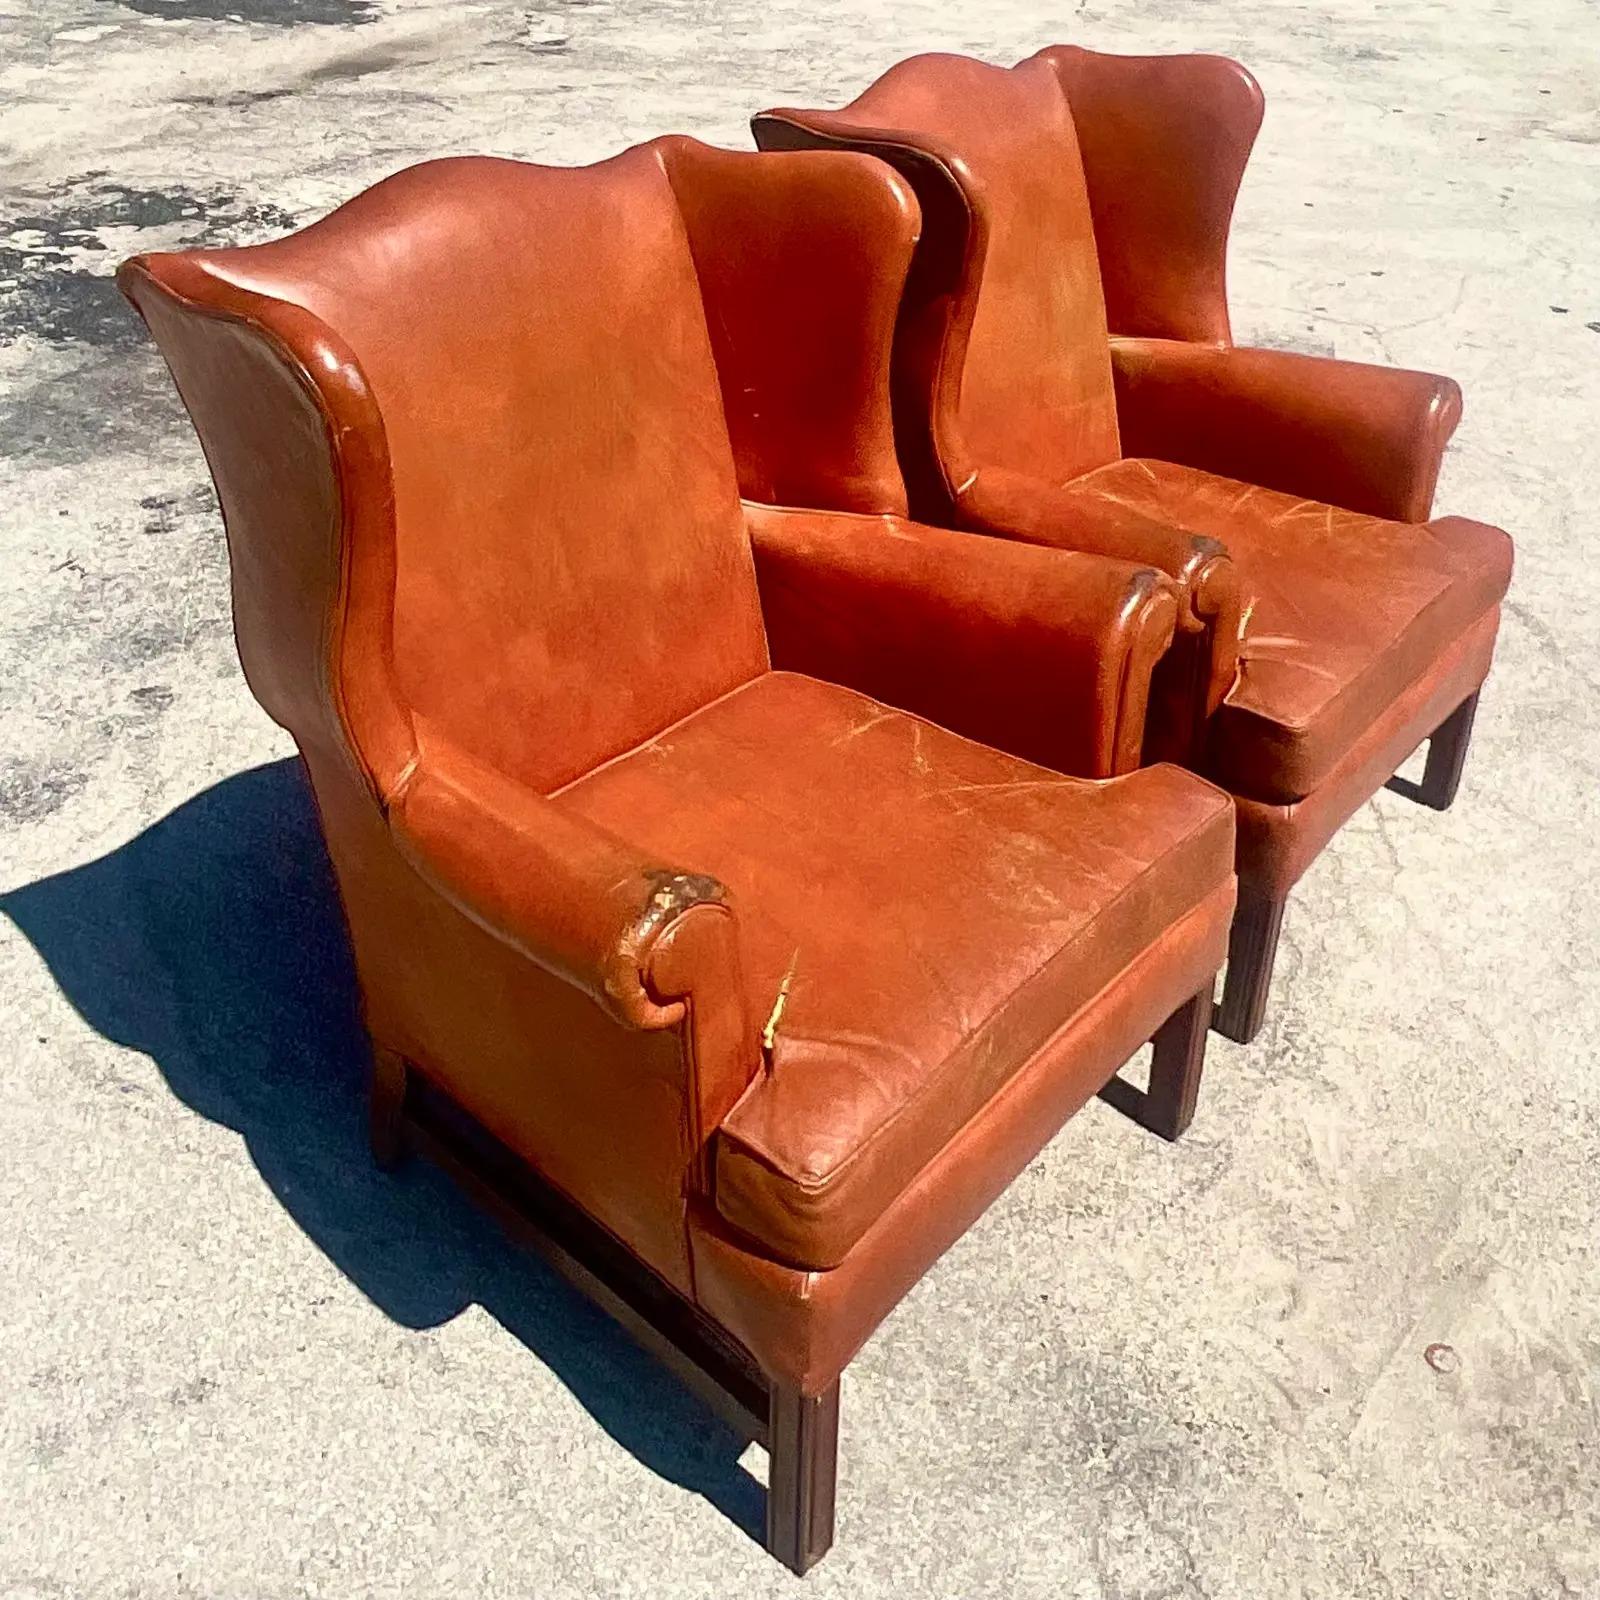 20th Century Vintage Boho Distressed Leather Wingback Chairs, a Pair